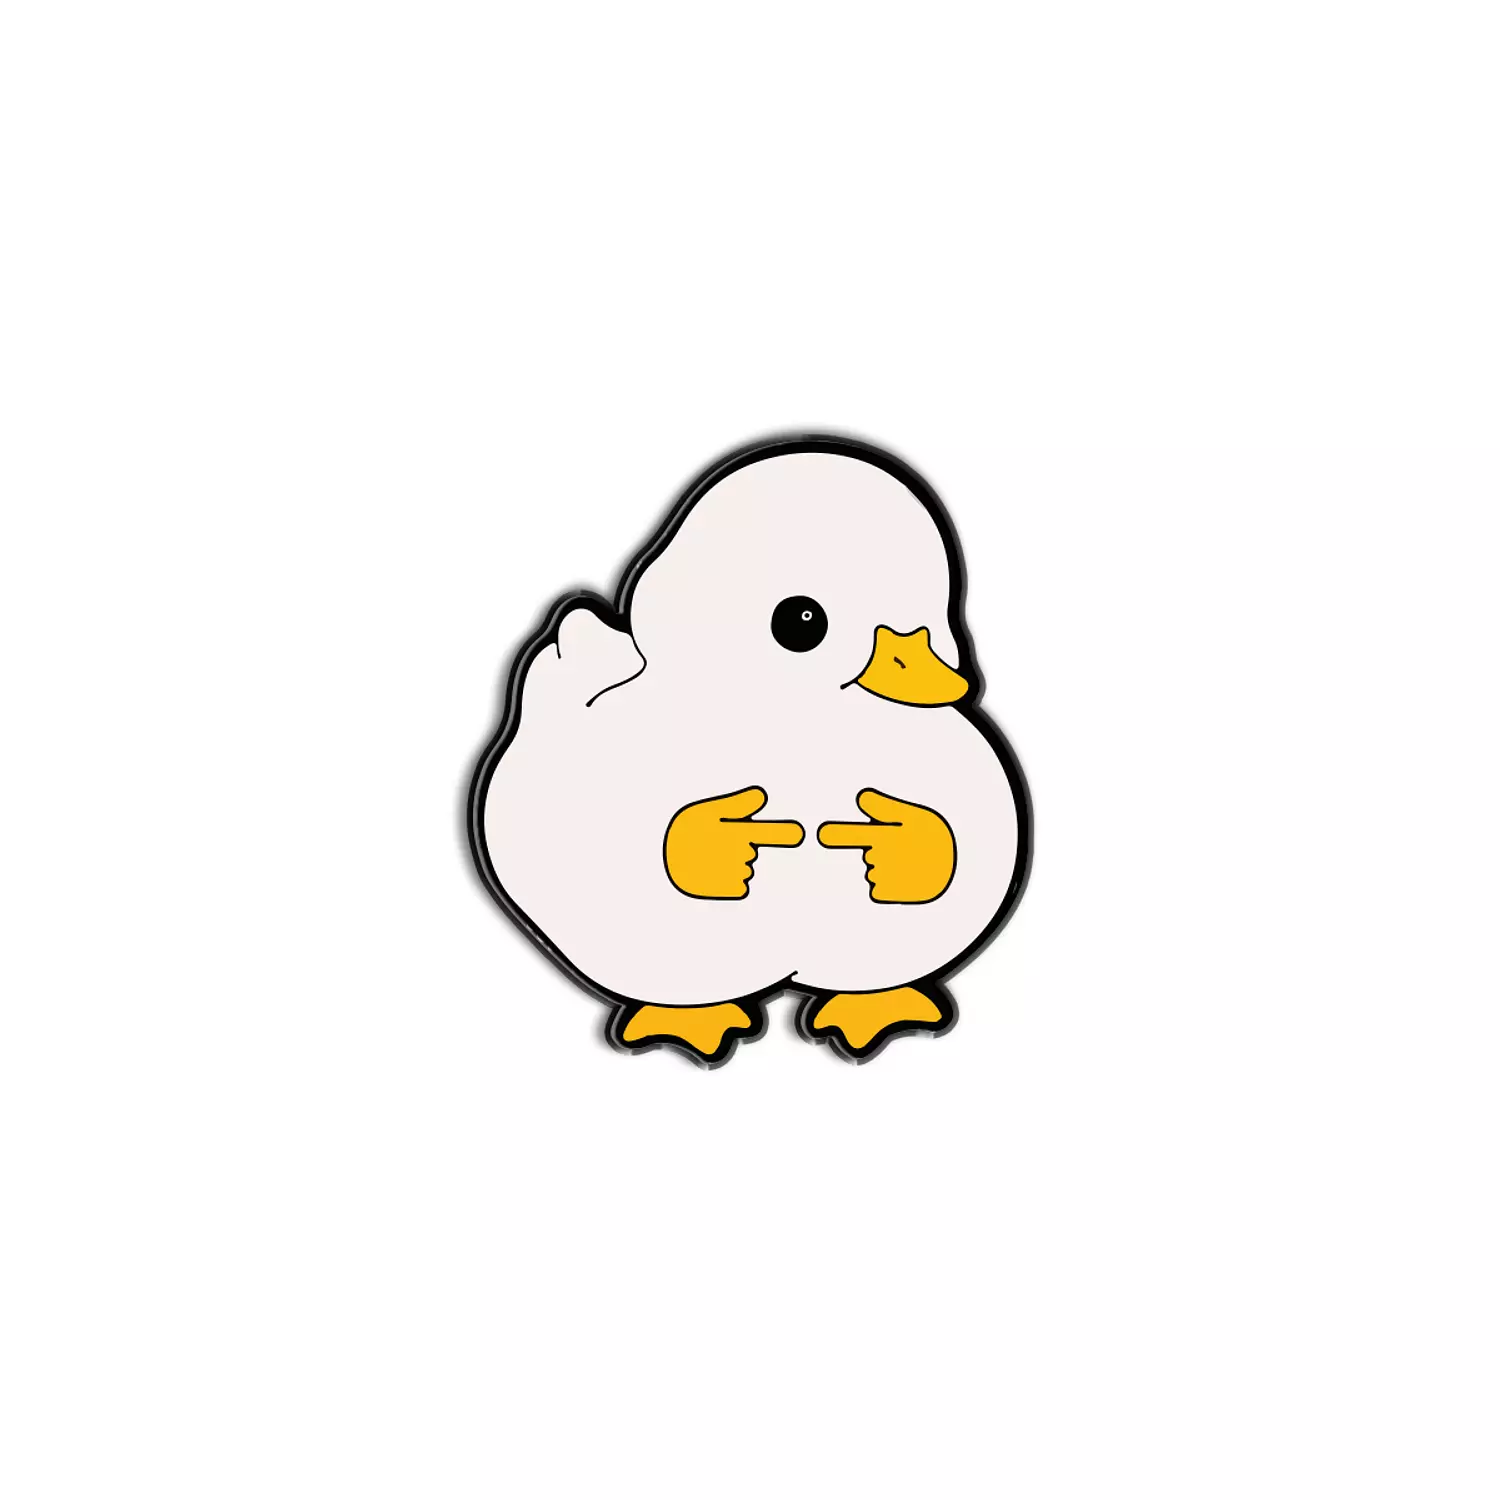 Innocent Duck 🦆 hover image